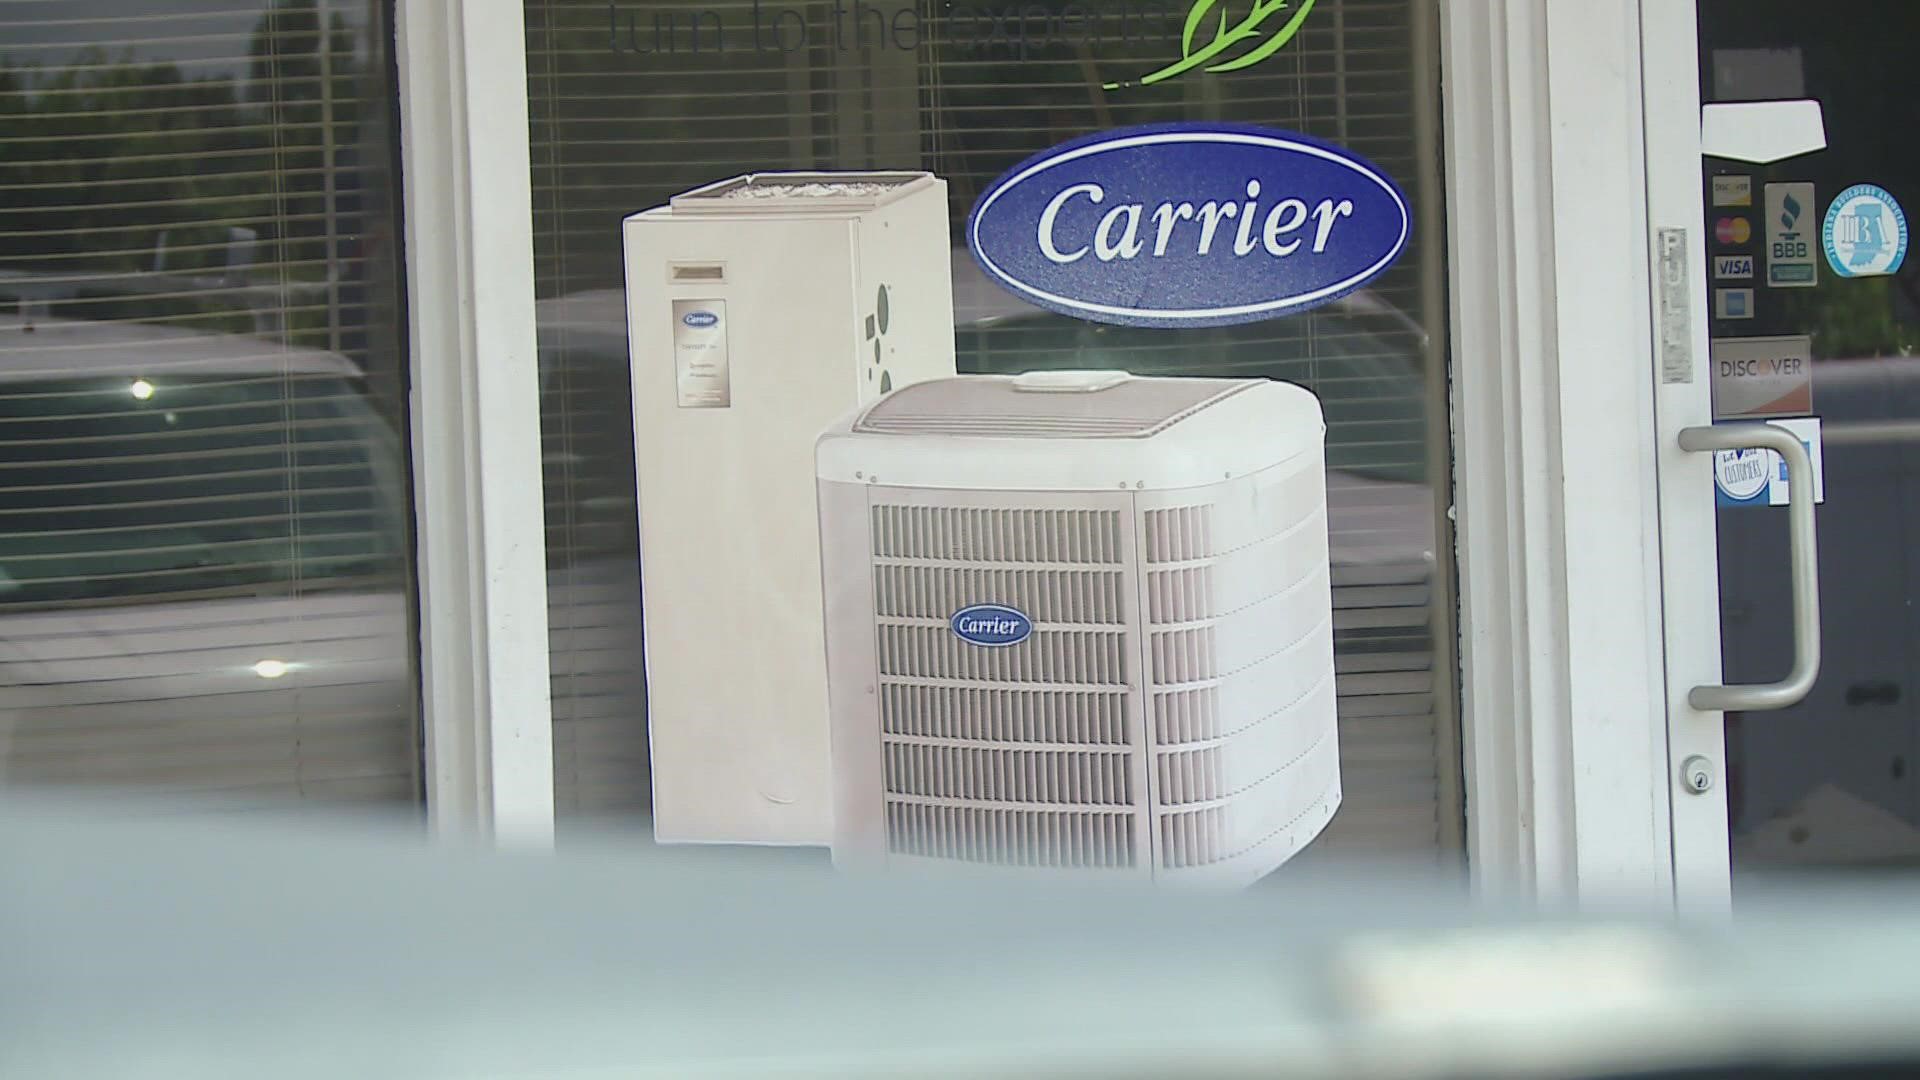 The owner of one company said they have started seeing issues with getting parts needed to repair the air conditioning at some people's homes.